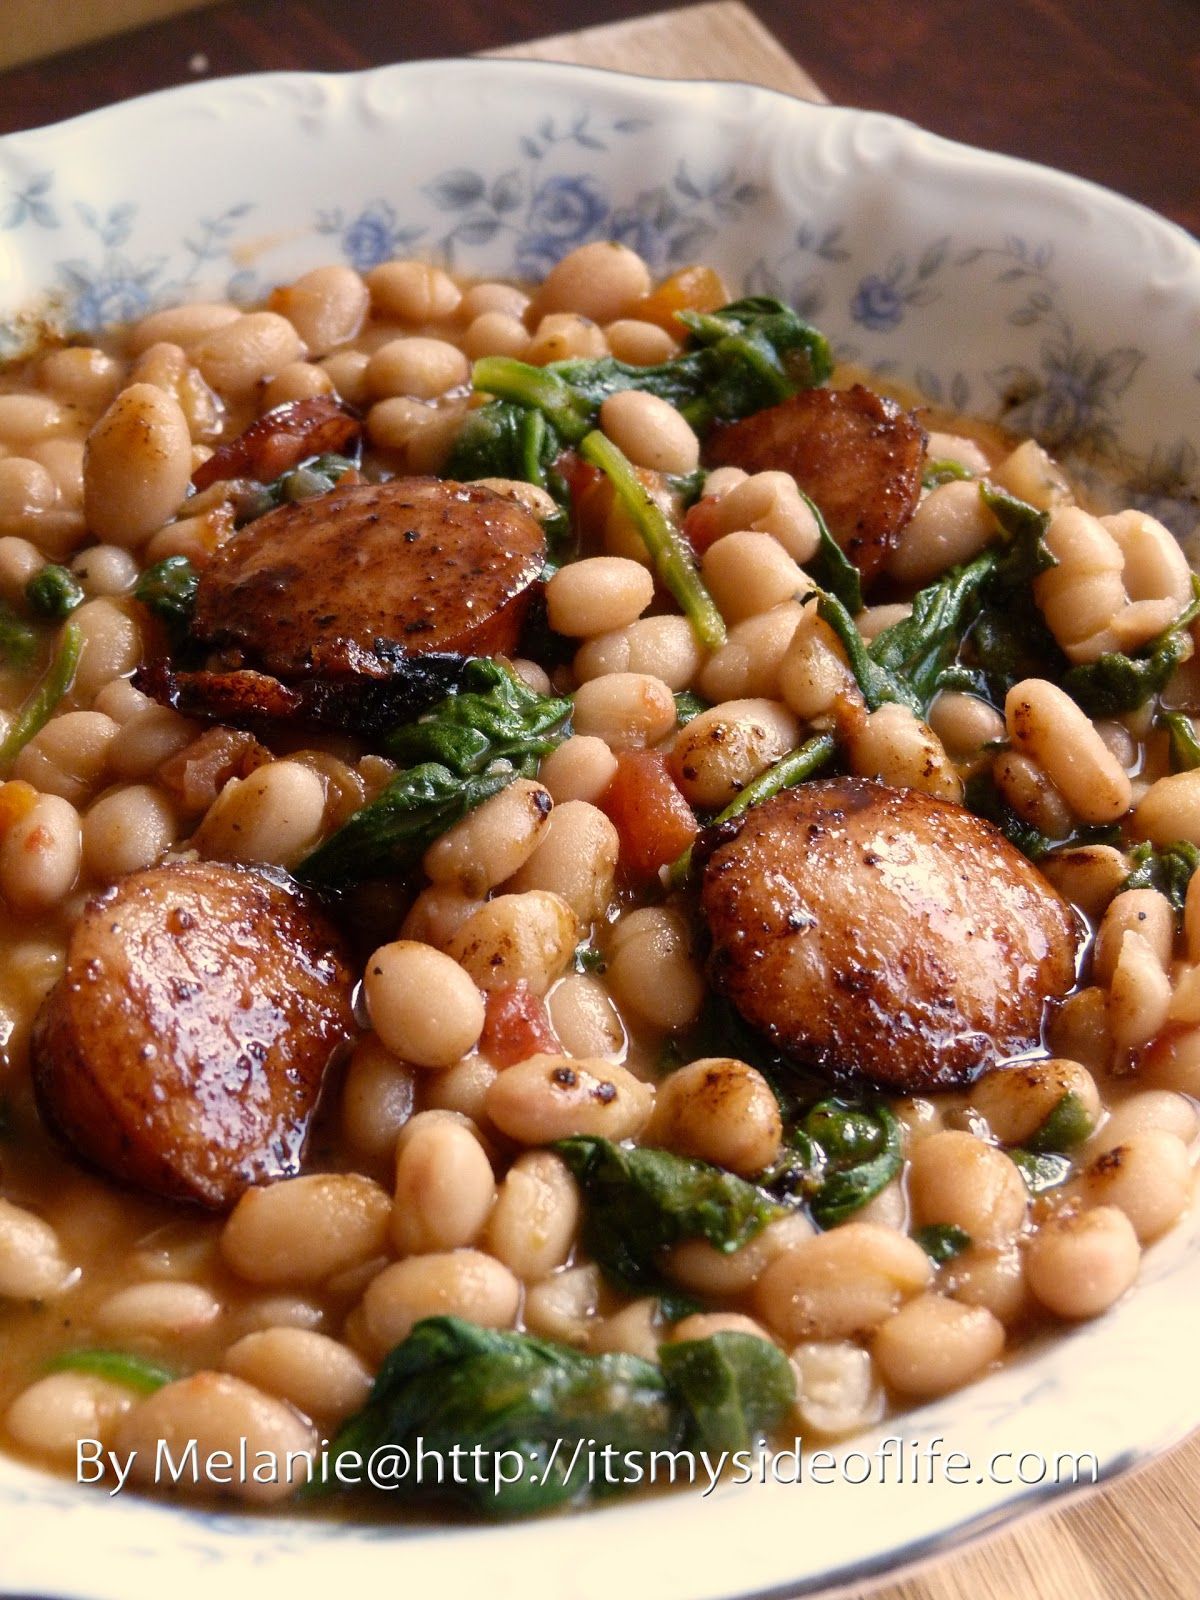 White Beans with Spinach & Sausage.  Making this tonight using Kale instead of Spinach.  Sounds like such